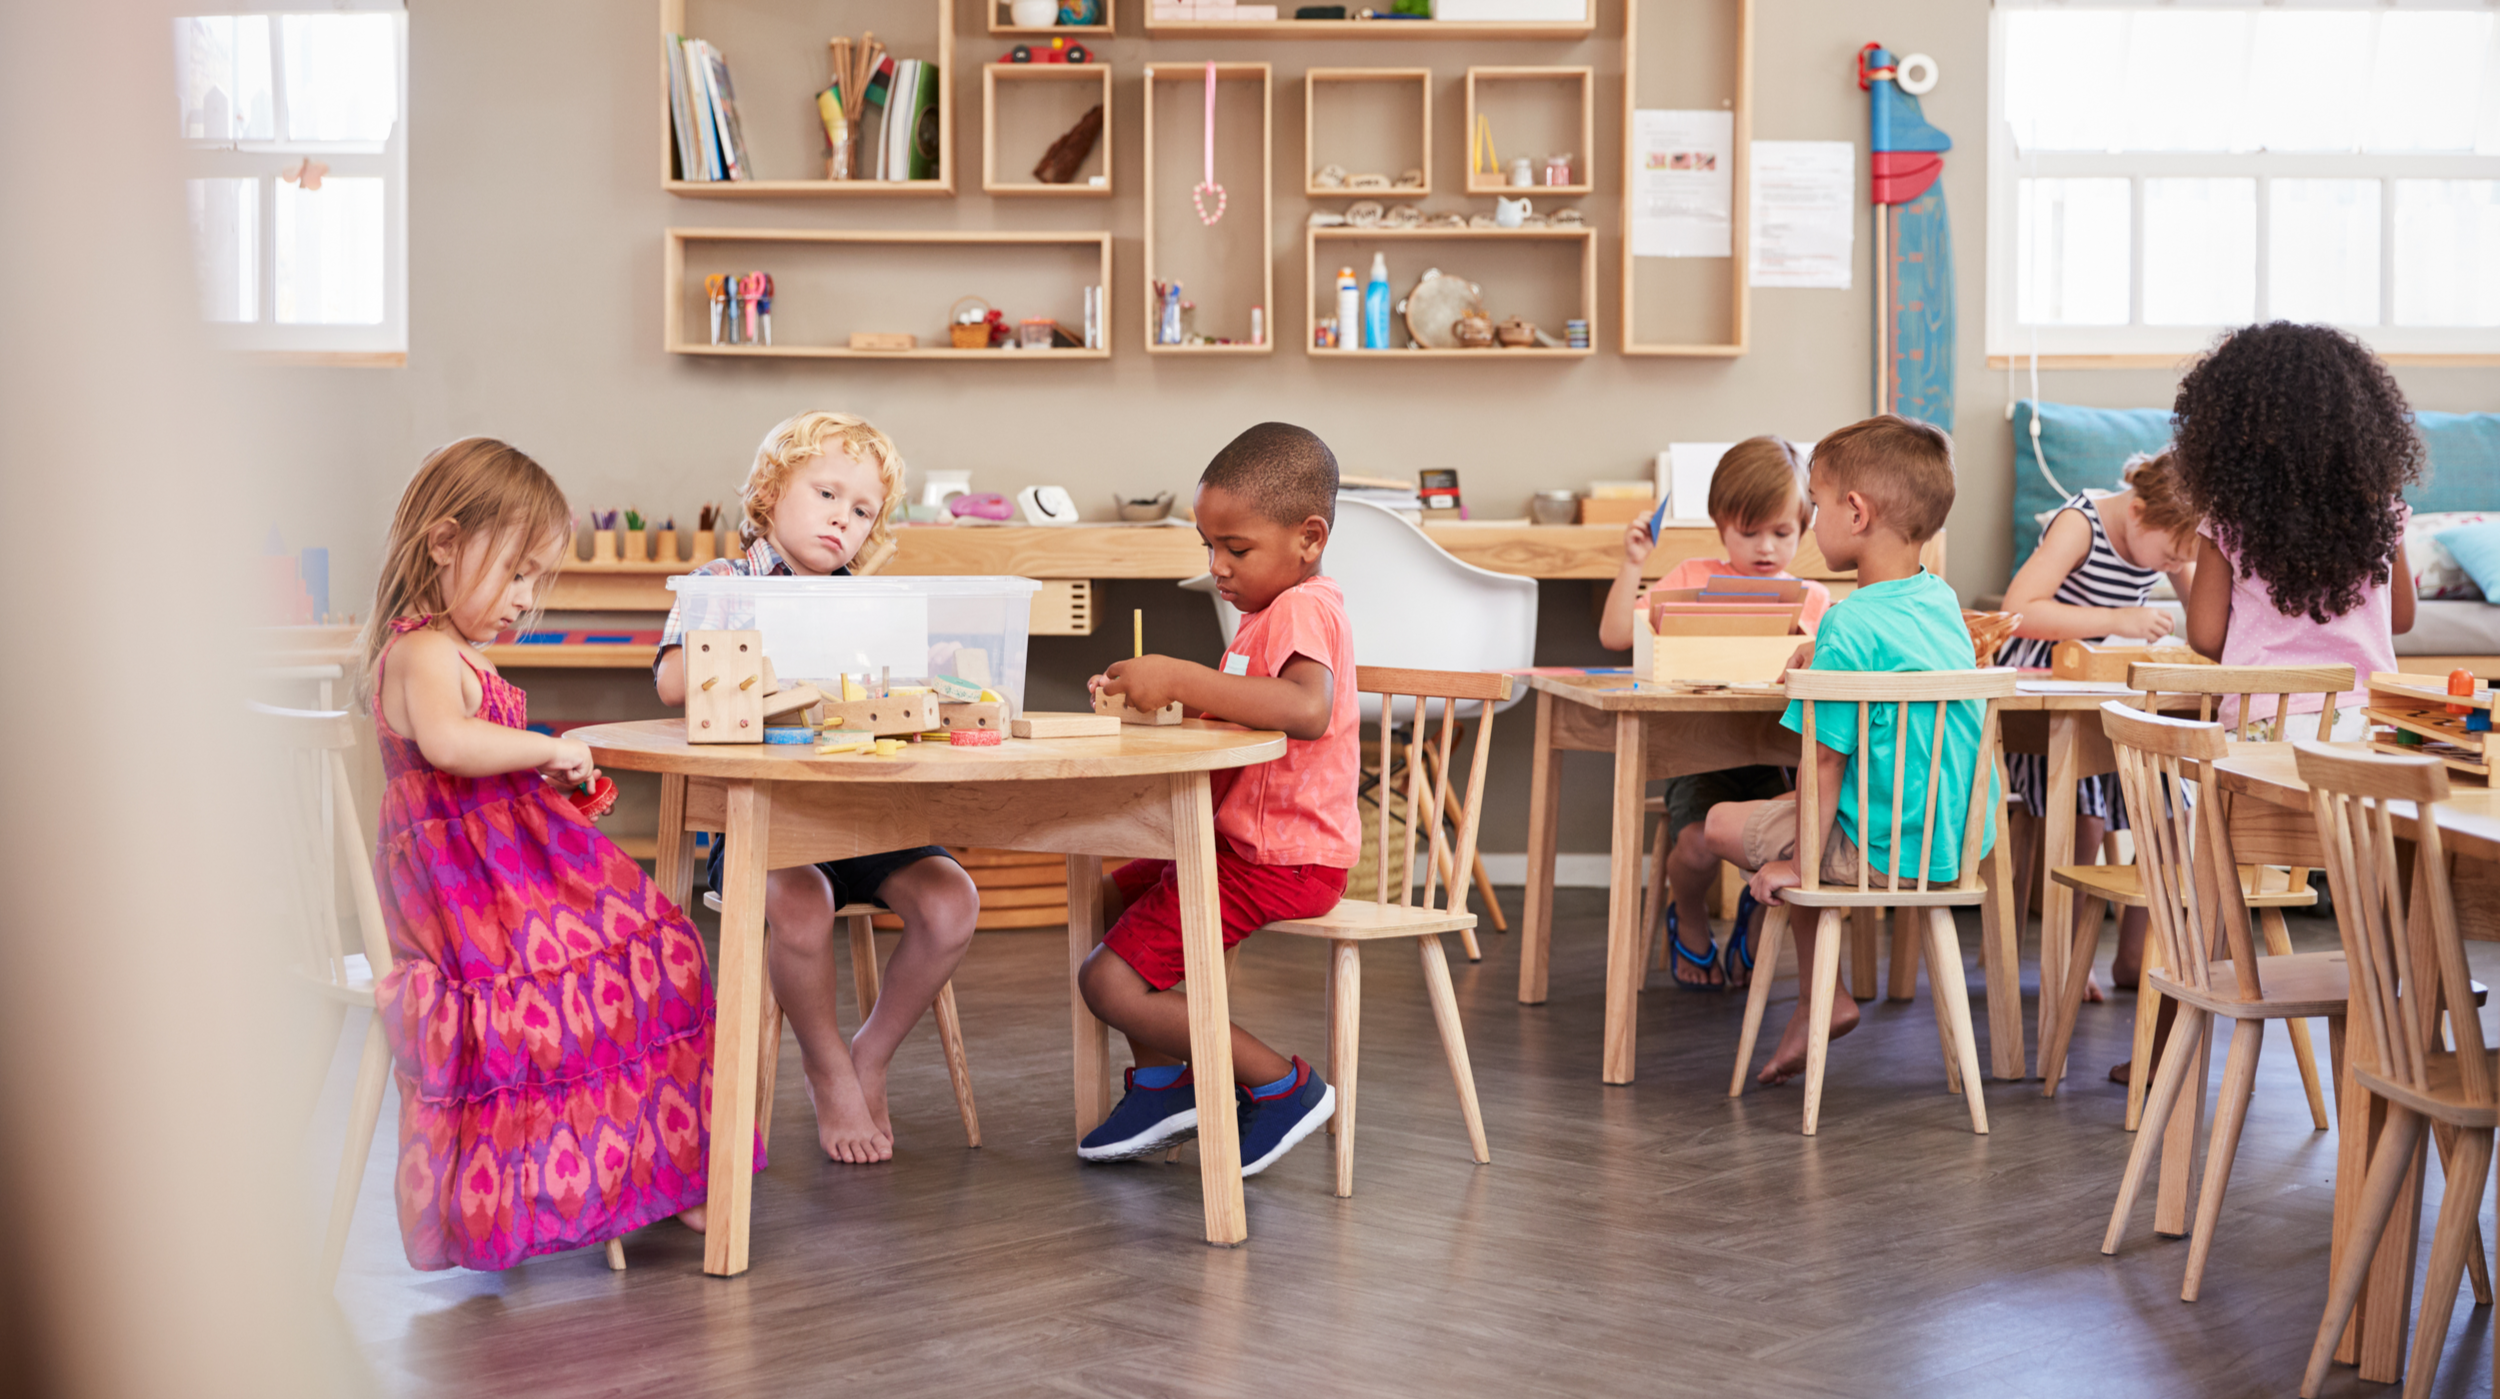 Observing a Montessori Classroom - What Can I Expect?